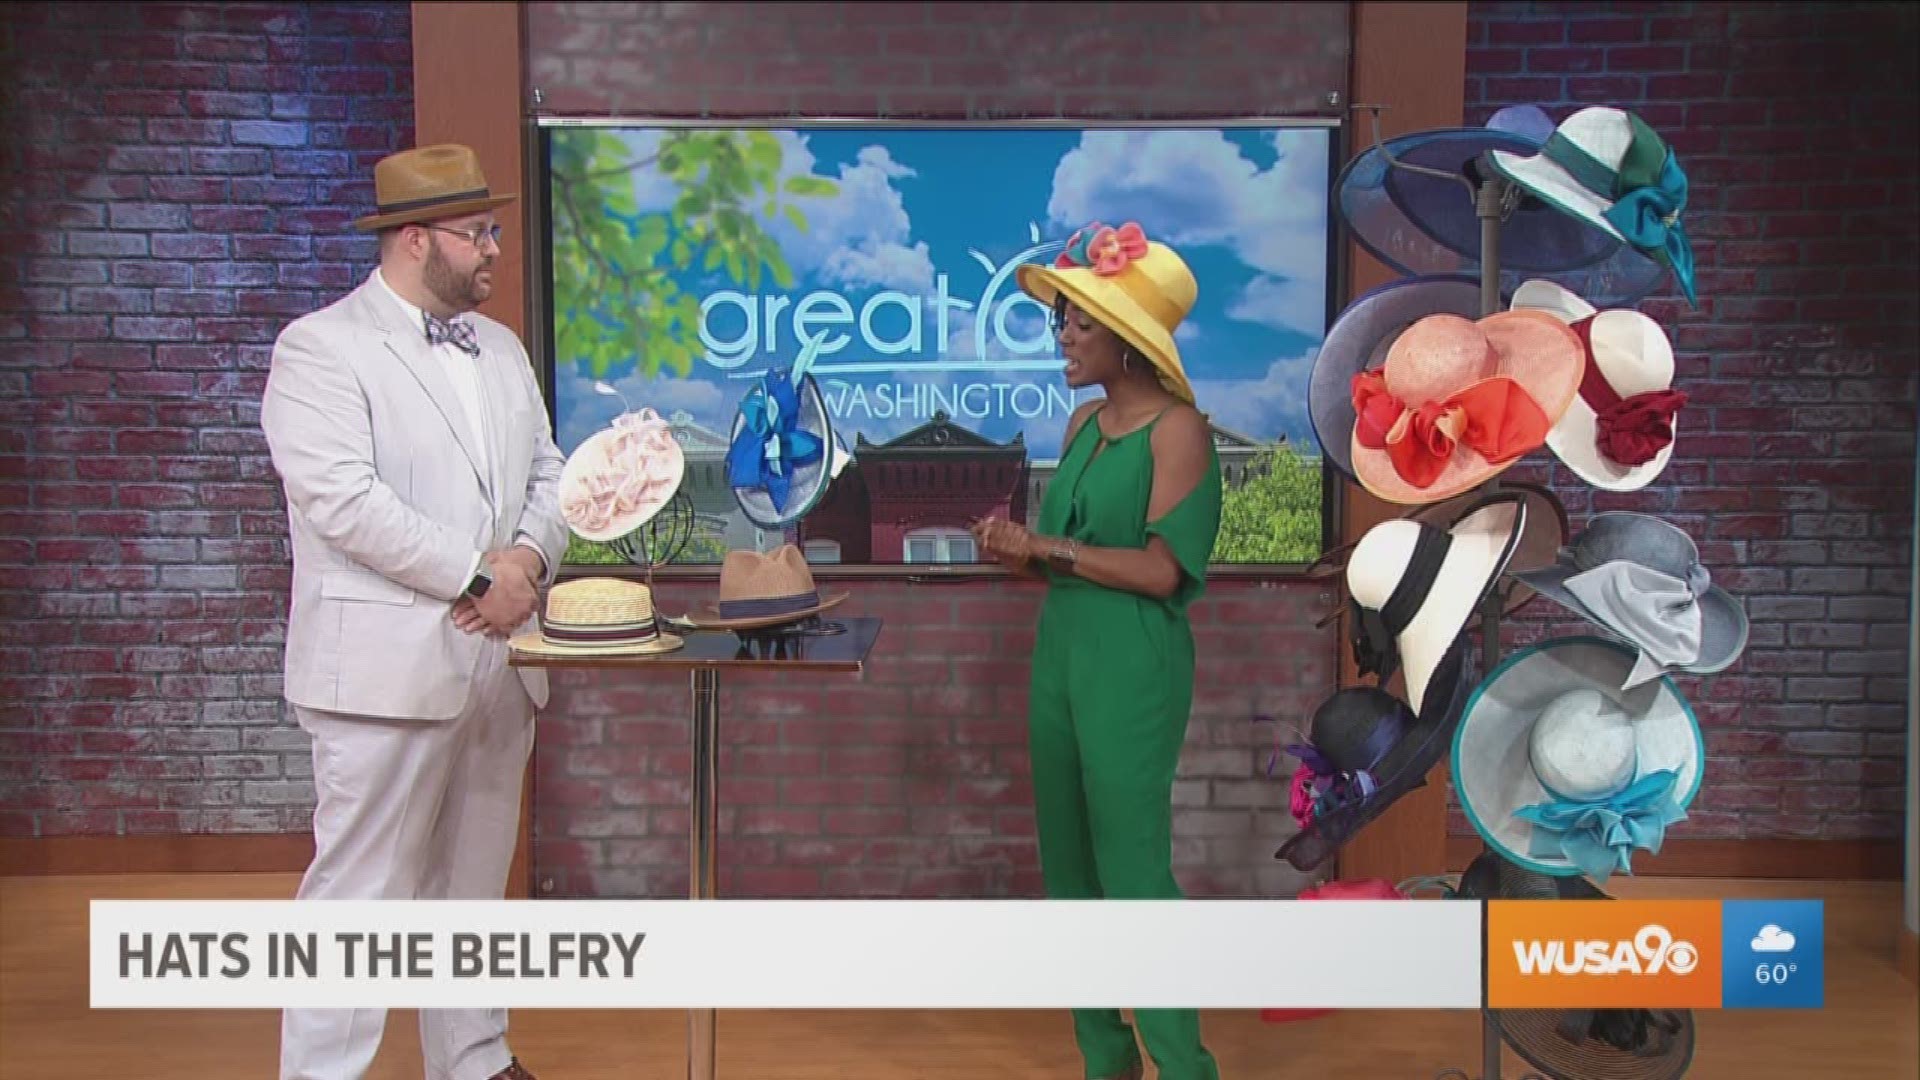 Hats in the Belfry is a Maryland based business that has the hottest hat fashion. It's the perfect place to grab a hat if you're headed to the Preakness.